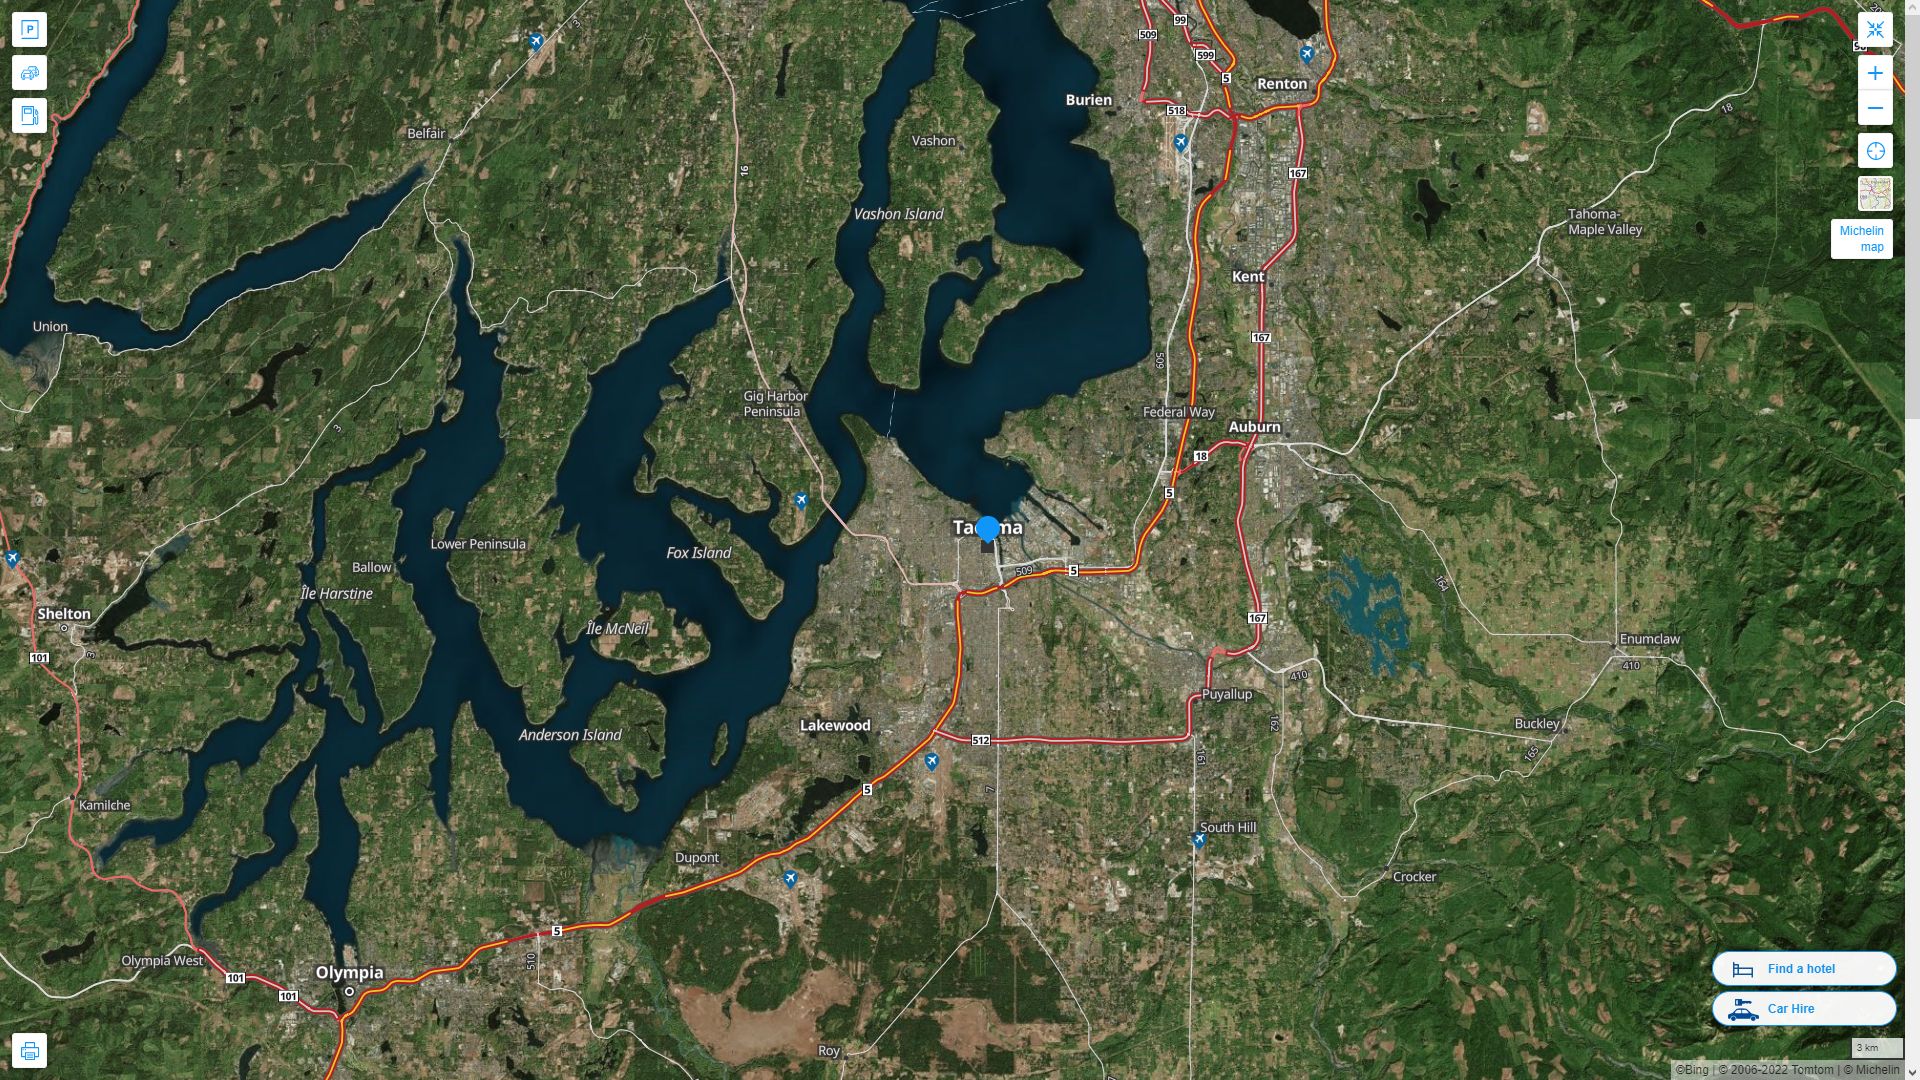 Tacoma Washington Highway and Road Map with Satellite View